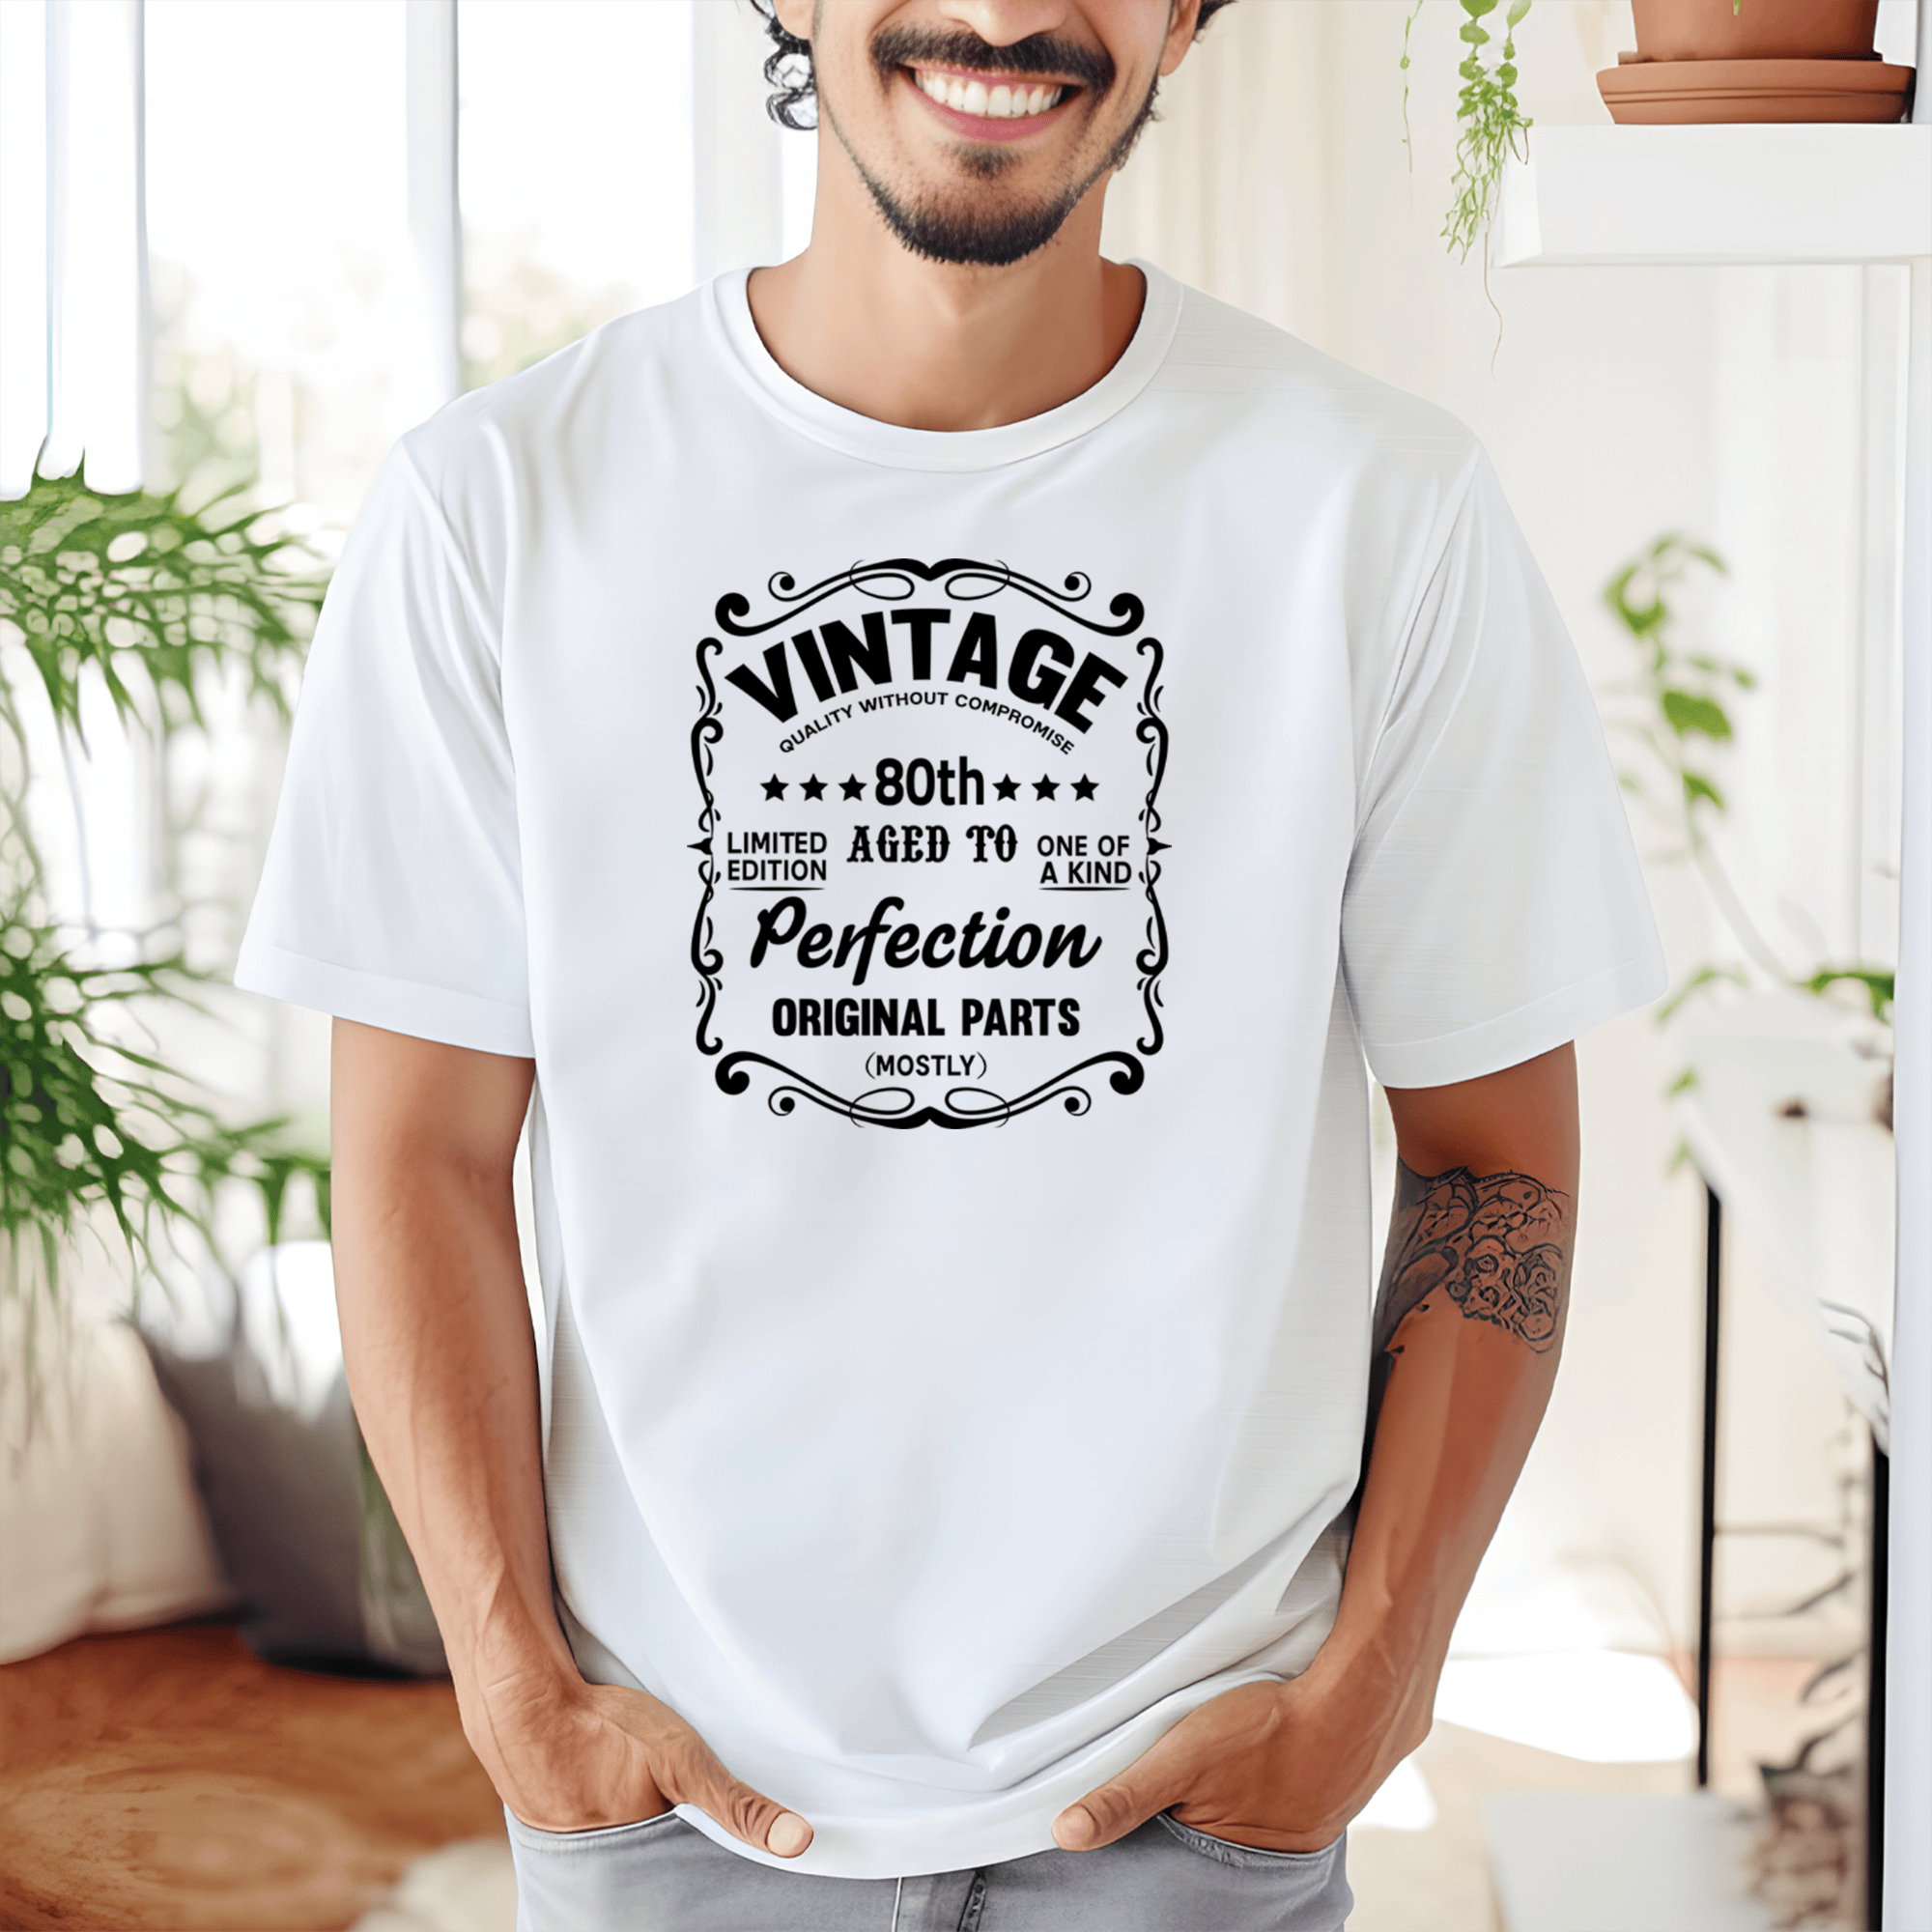 Mens White T Shirt with 80th-Vintage design